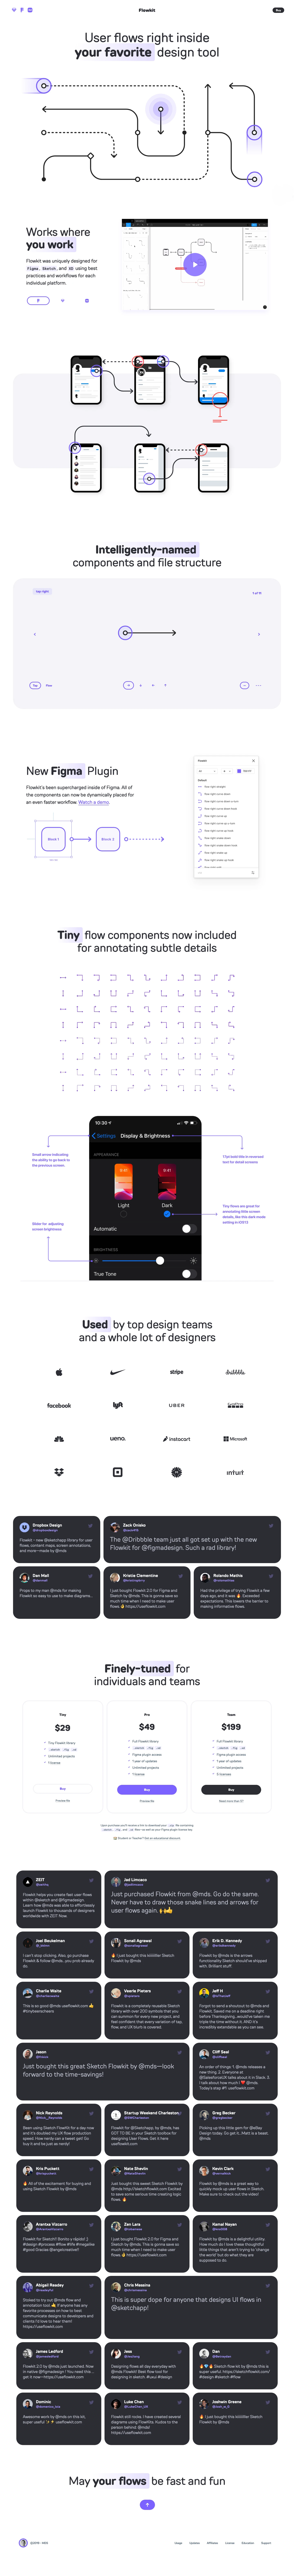 Flowkit Landing Page Example: Userflows right inside your favorite design tool. Available for Figma, Sketch, and Adobe XD.